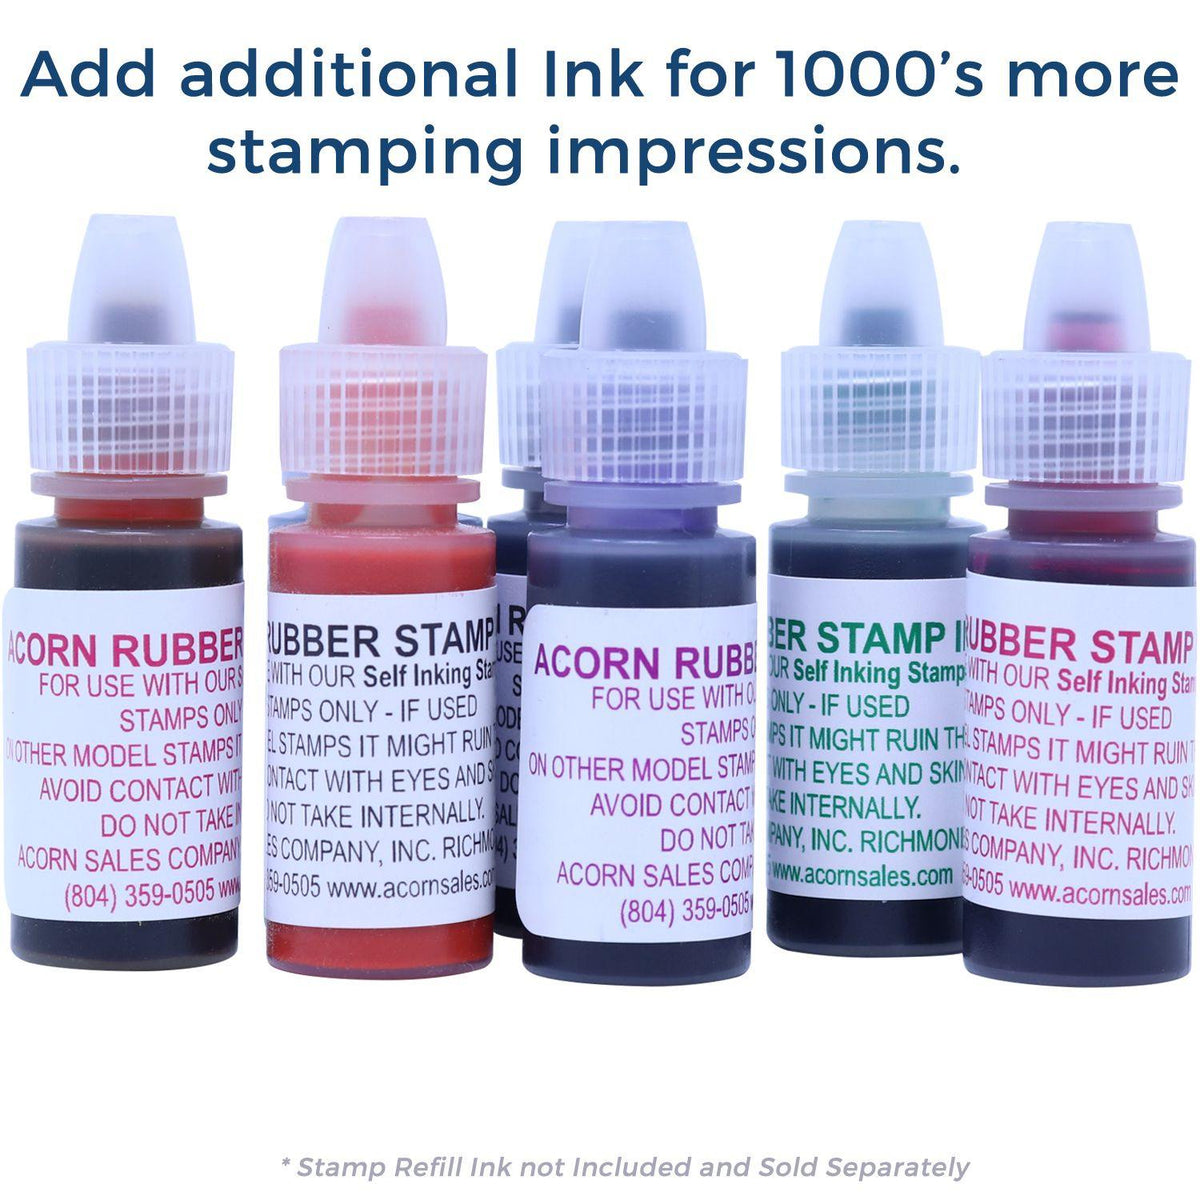 Refill Inks for Large Pre-Inked Faxed on Stamp Available